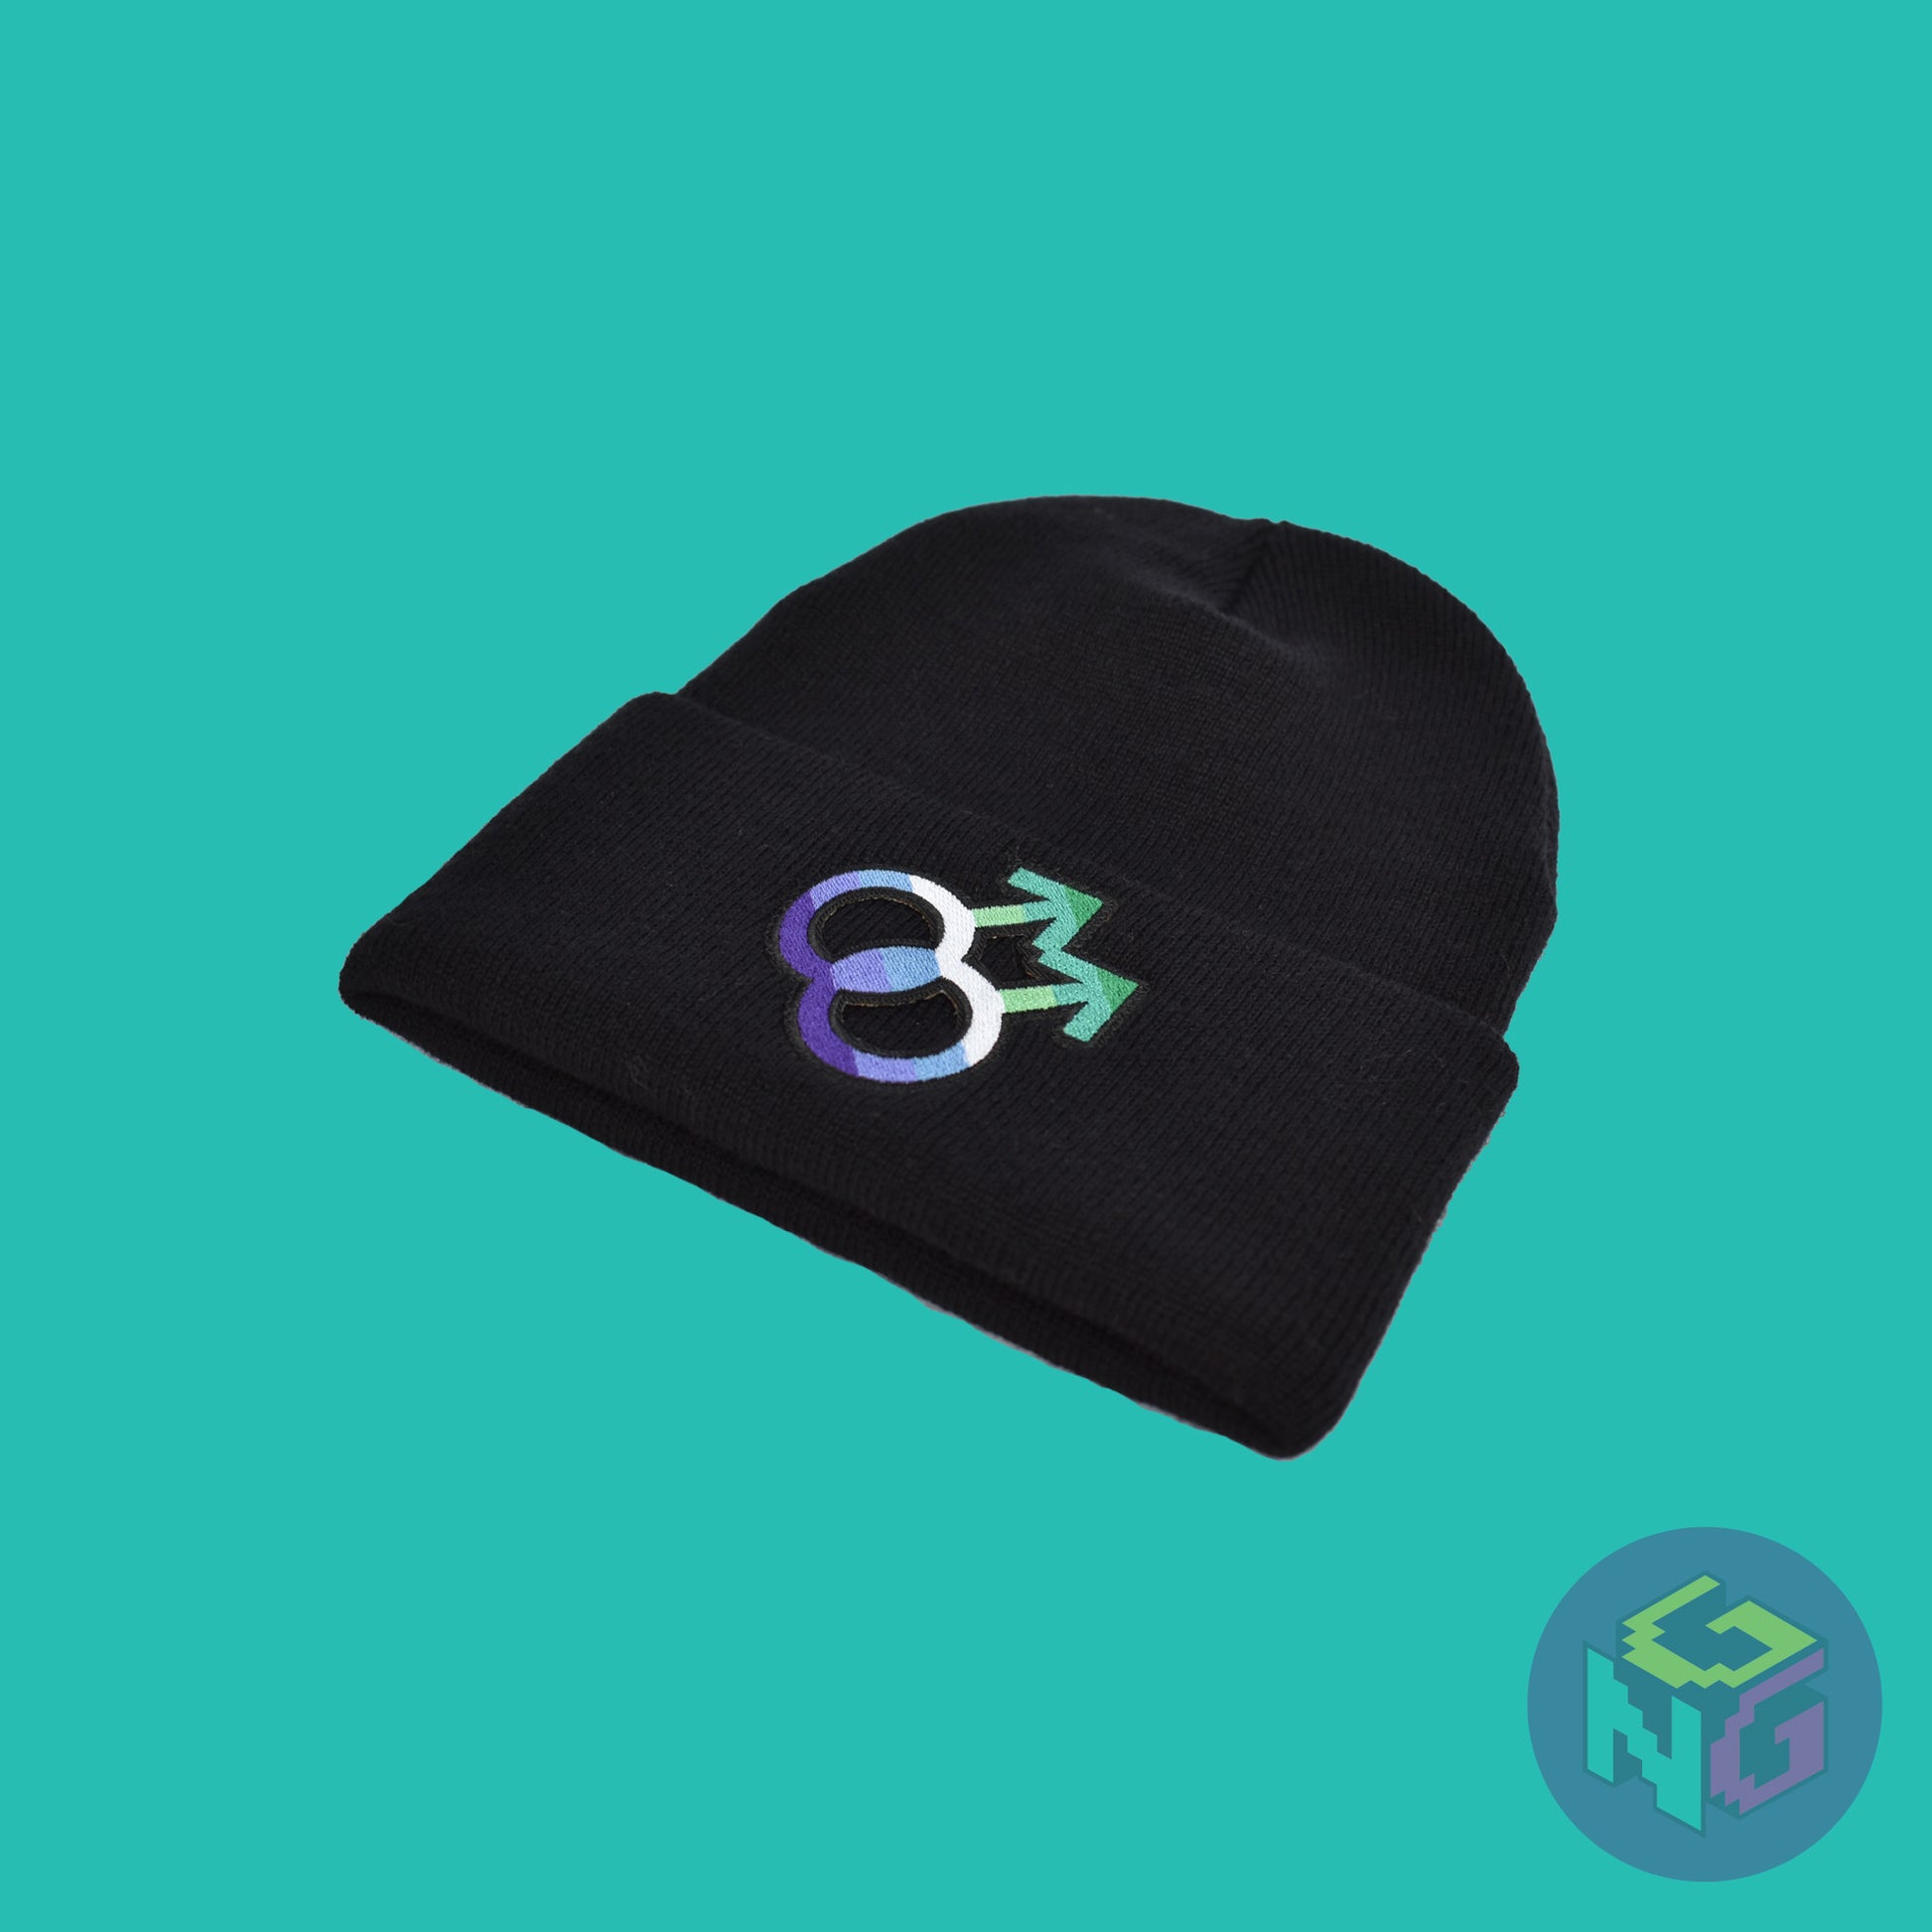 Black knit fabric beanie with the gay symbol in greens, blues, and white on the front. It is laying flat seen from a lower right view